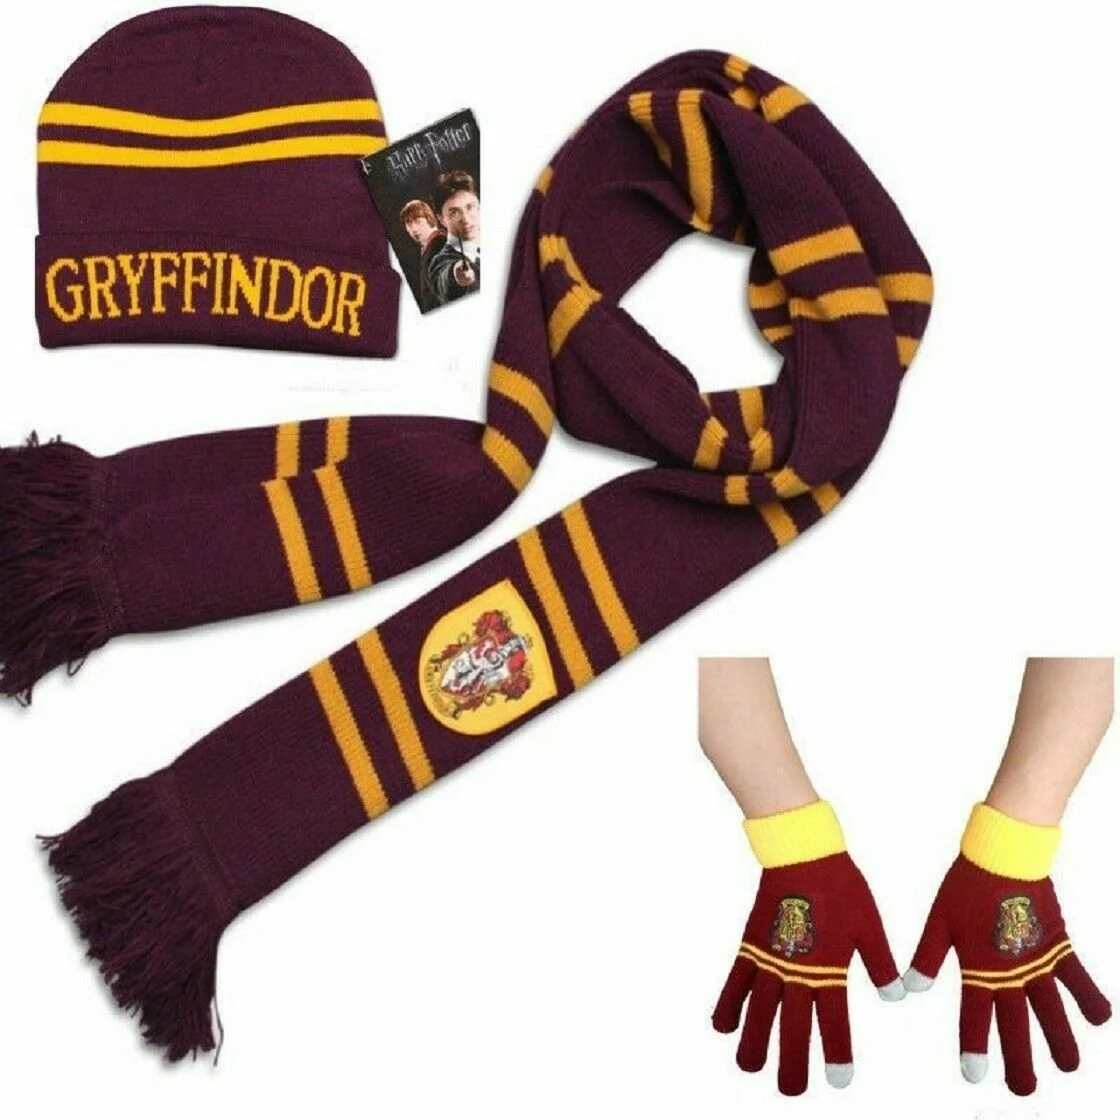 

3pcs Harries Scarf + Gloves+cap Warm Potters Thick Hogwarts College Badge Ravenclaw Gryffindor Tassel Scarf Accessories Gifts